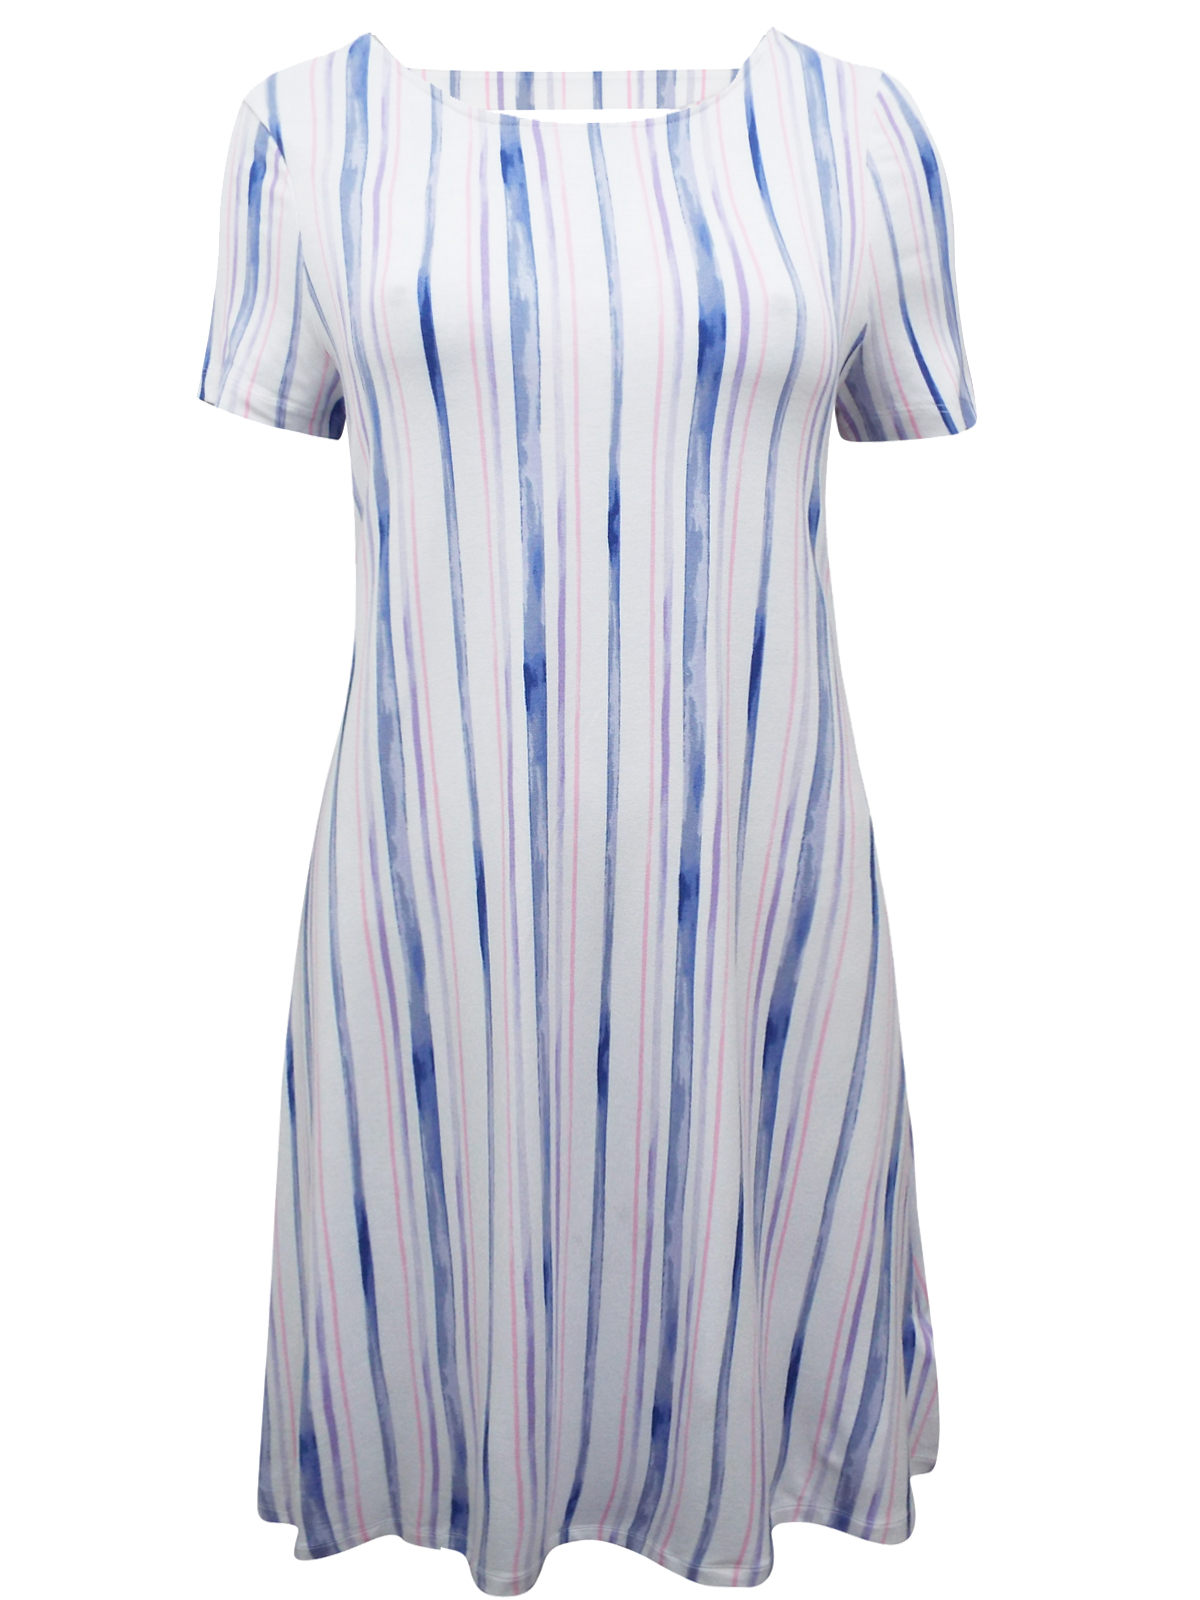 Marks and Spencer - - M&5 WHITE Striped Cut-Out Back Jersey Dress ...